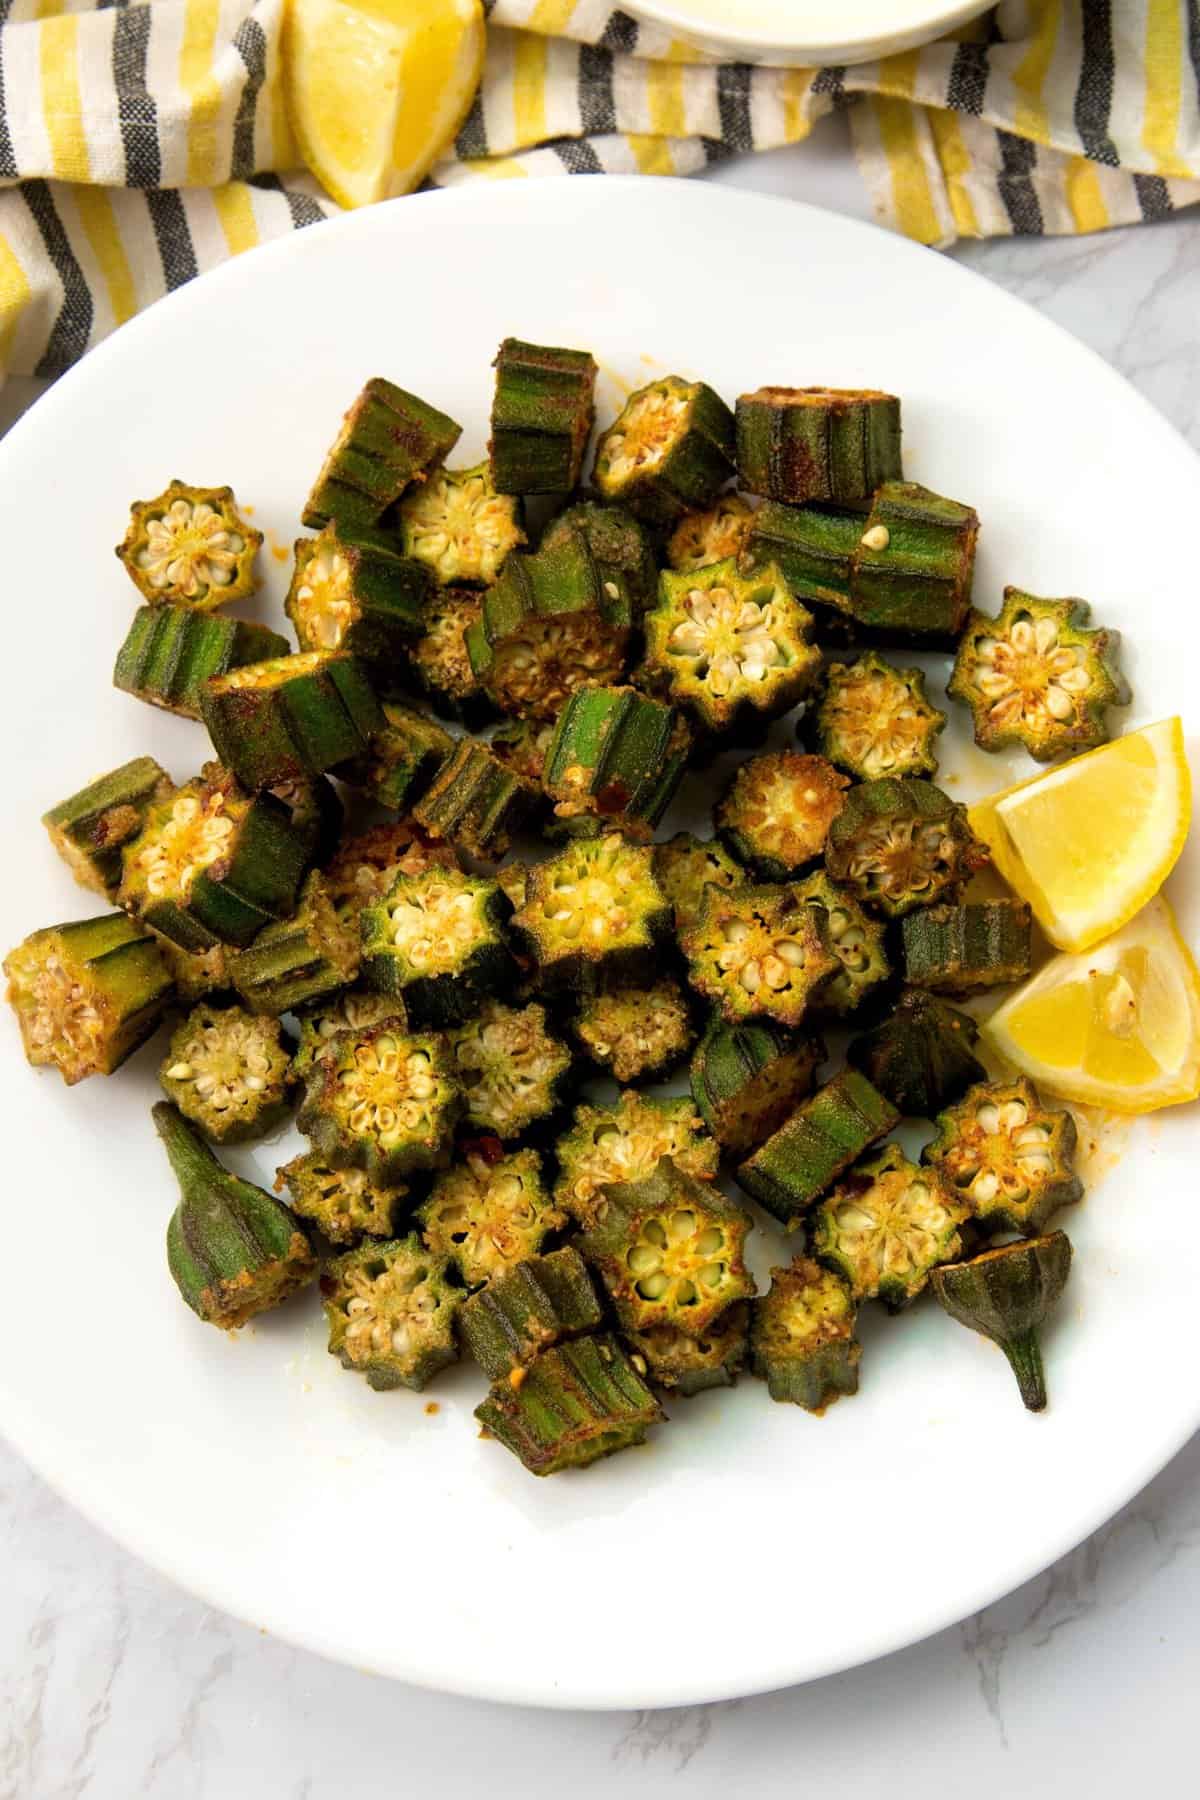 Oven roasted okra with a lemon wedge ready to serve